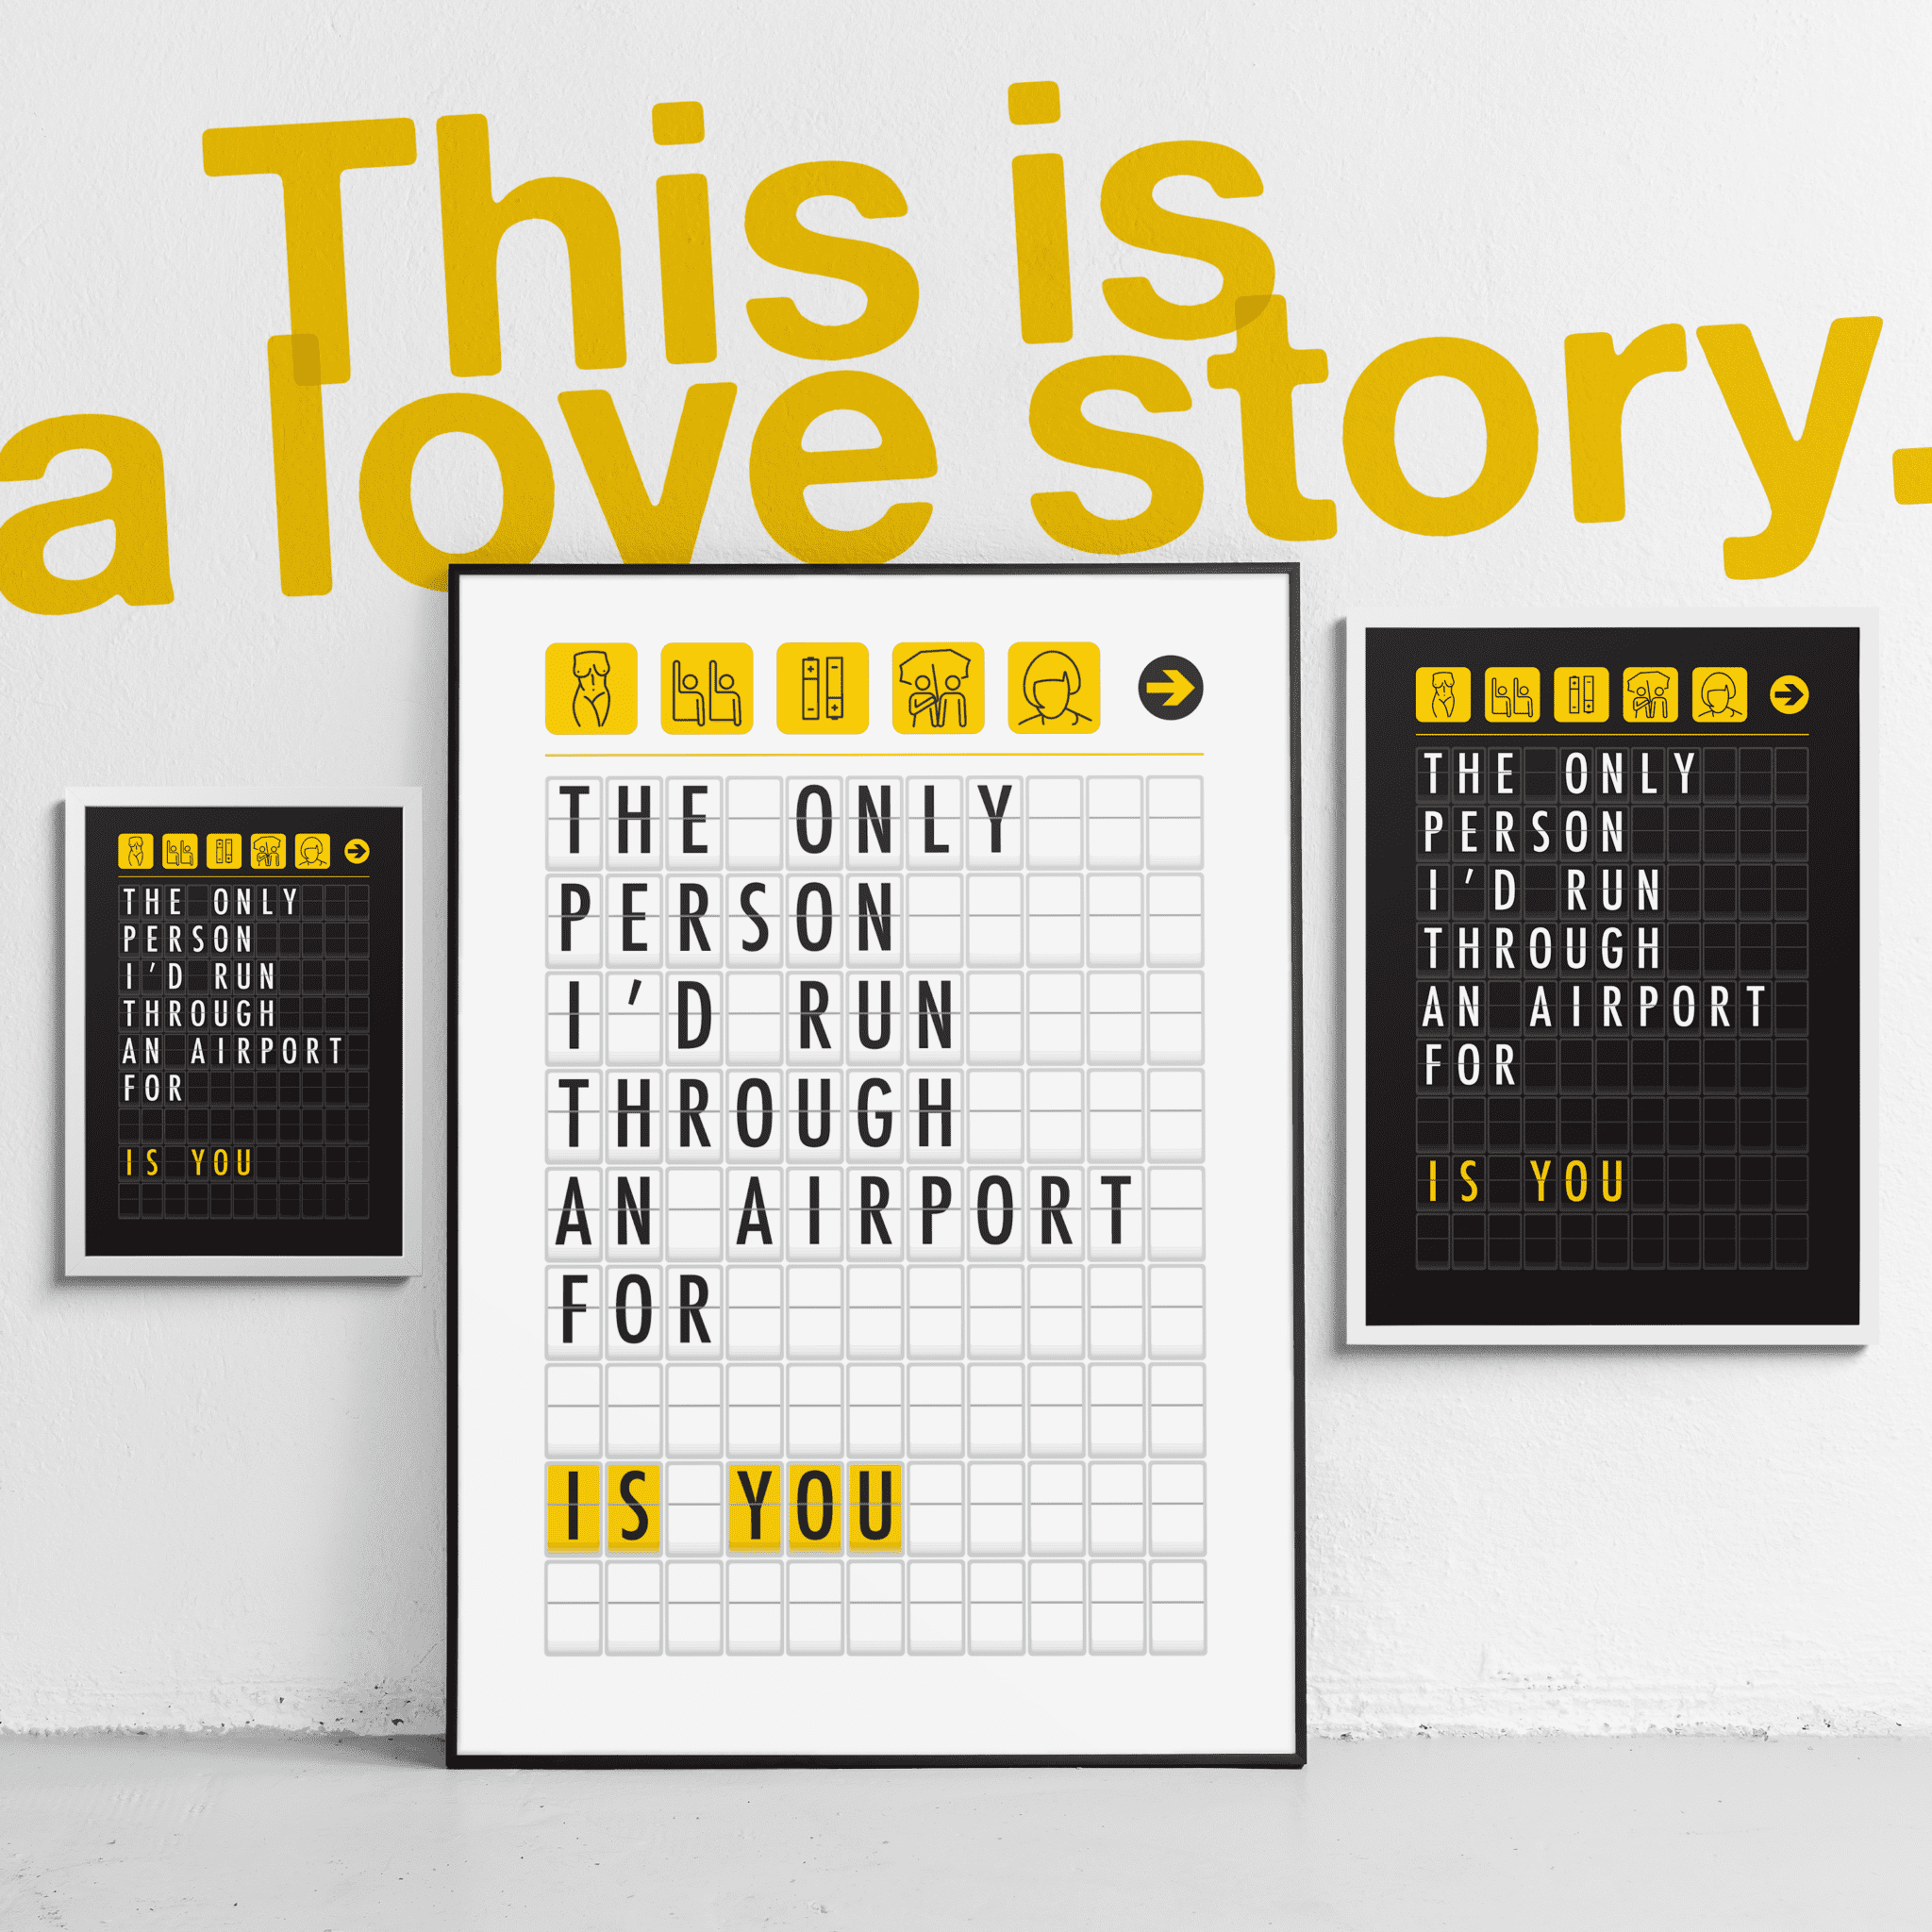 Big text "this is a love story" and three posters in various sizes and colors underneath. The posters have icons on top and the text "The only person I'd run through an airport for is you" in the style of an airport departure board.